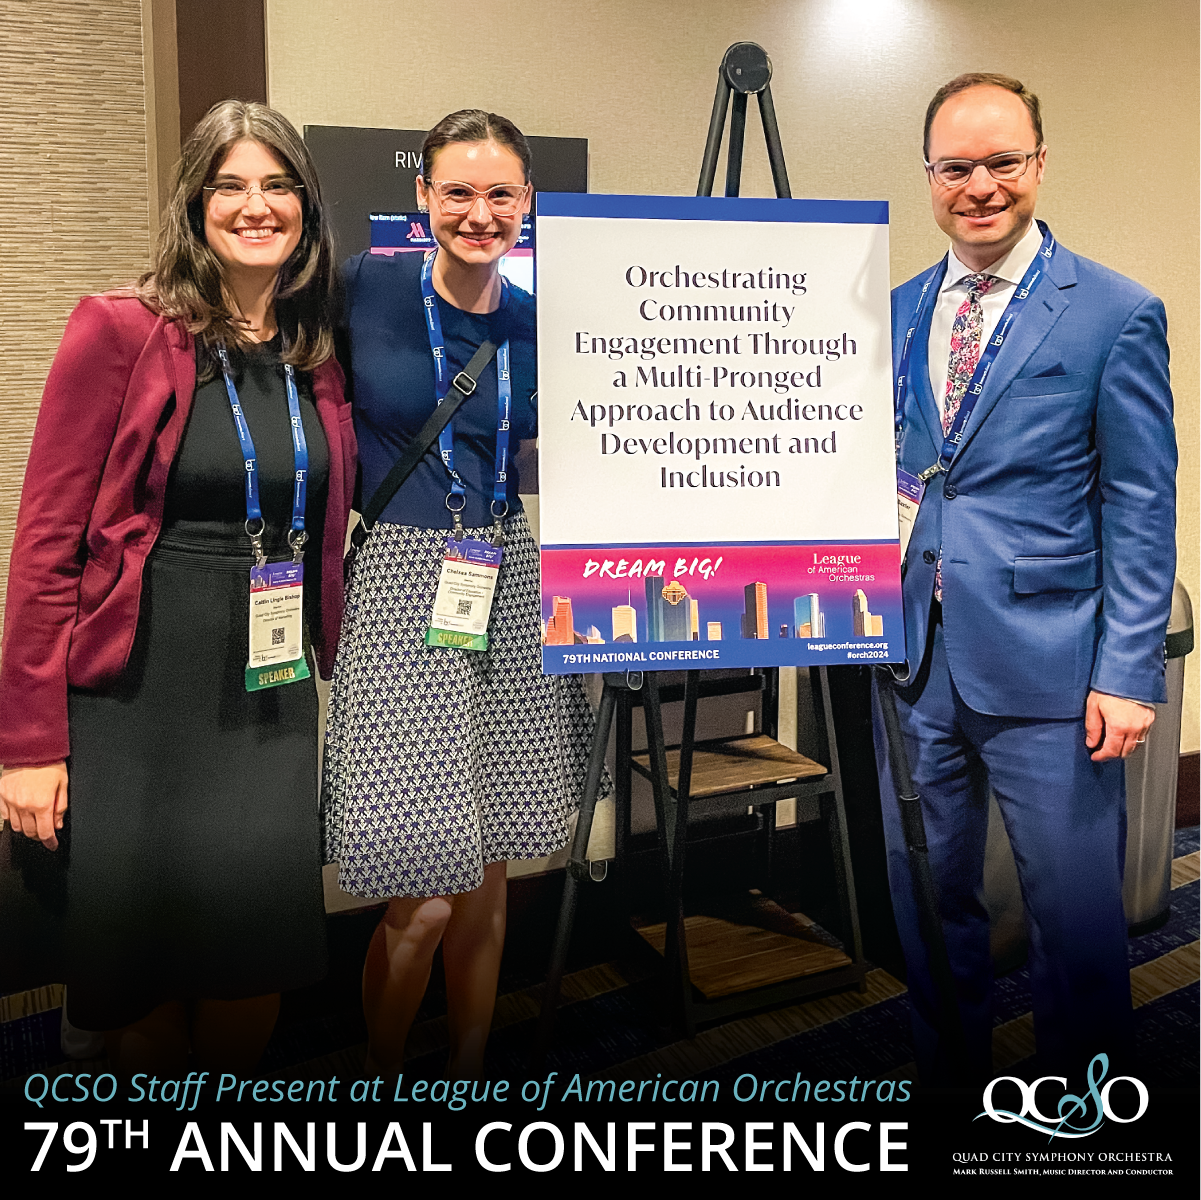 QCSO Staff Present at League of American Orchestras Conference 